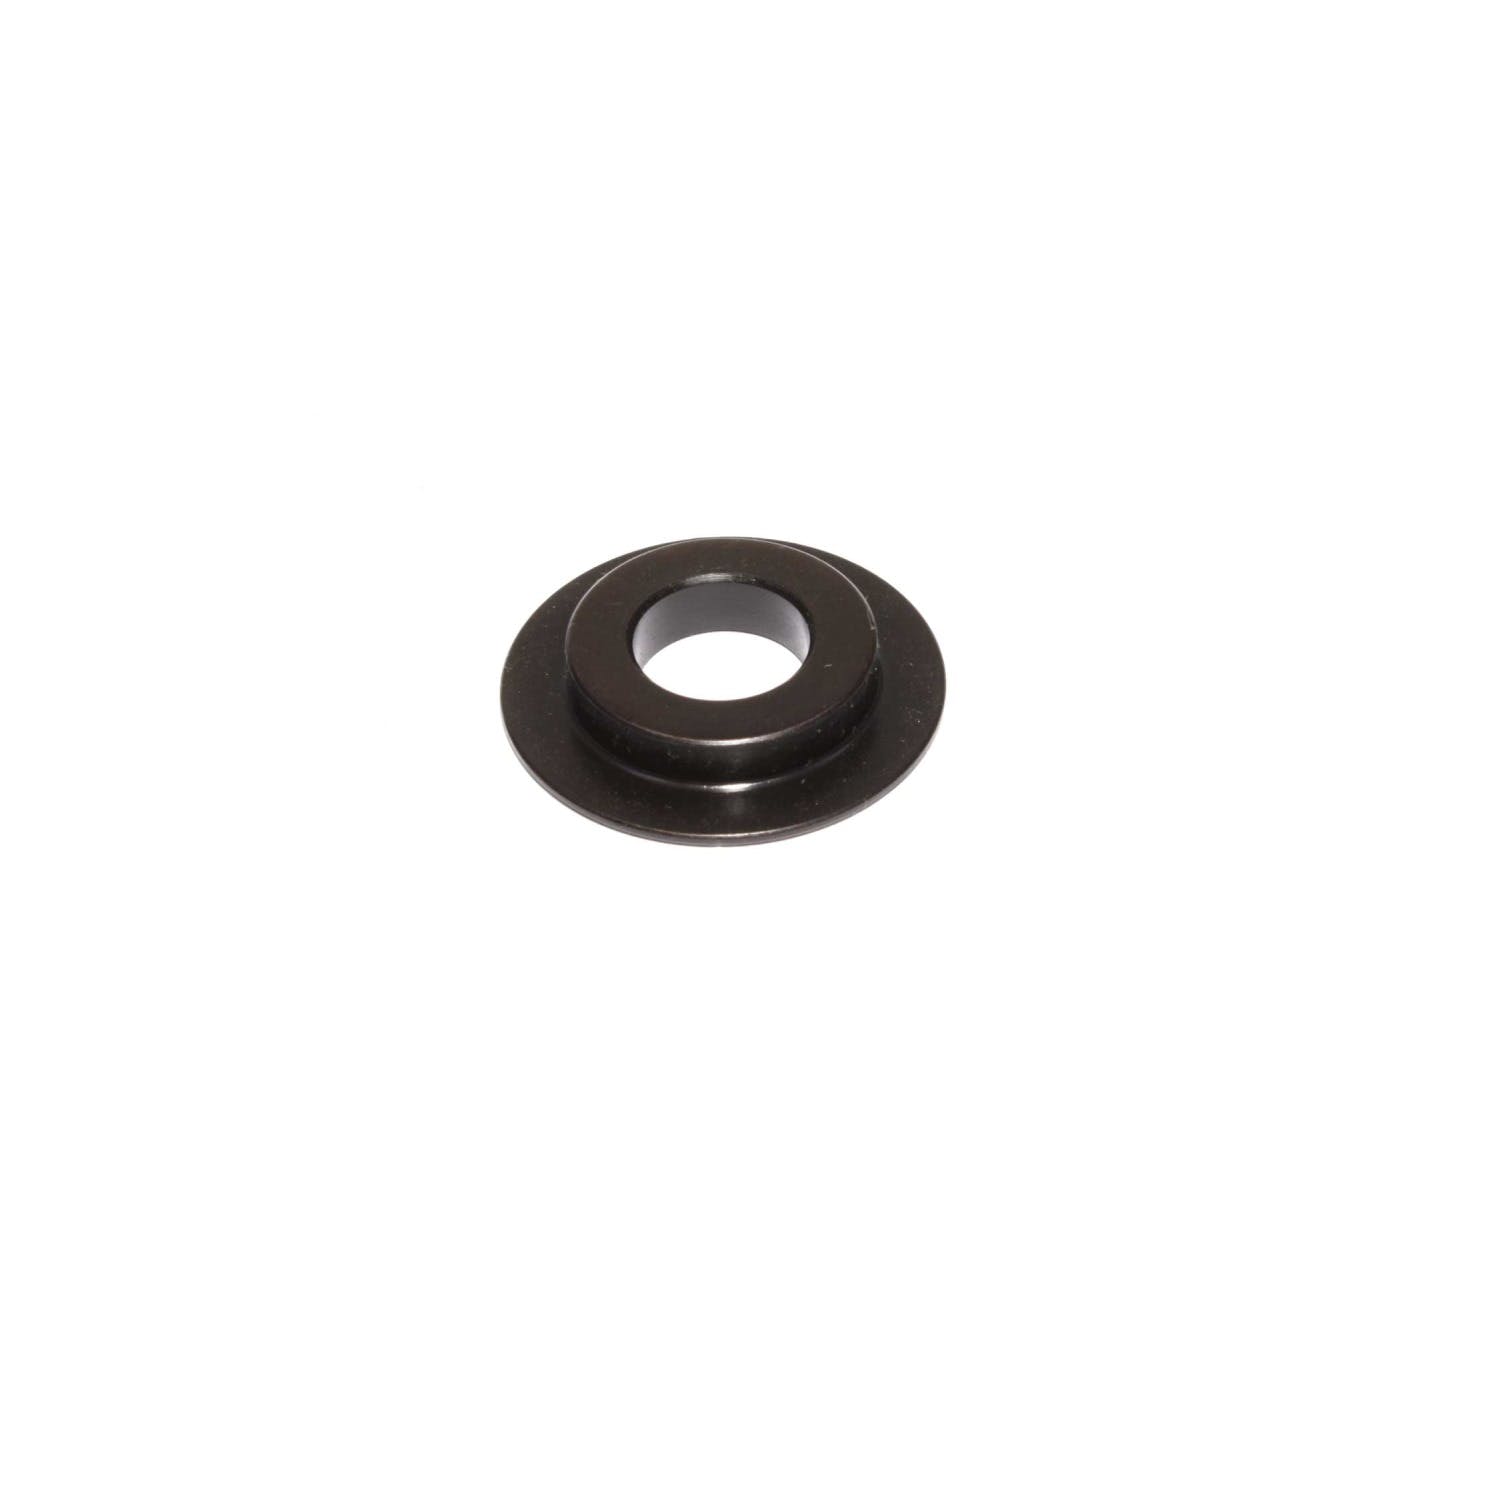 Competition Cams 4669-1 ID Spring Locator - 1.660 inch OD, .570 inch ID, .060 inch Thickness